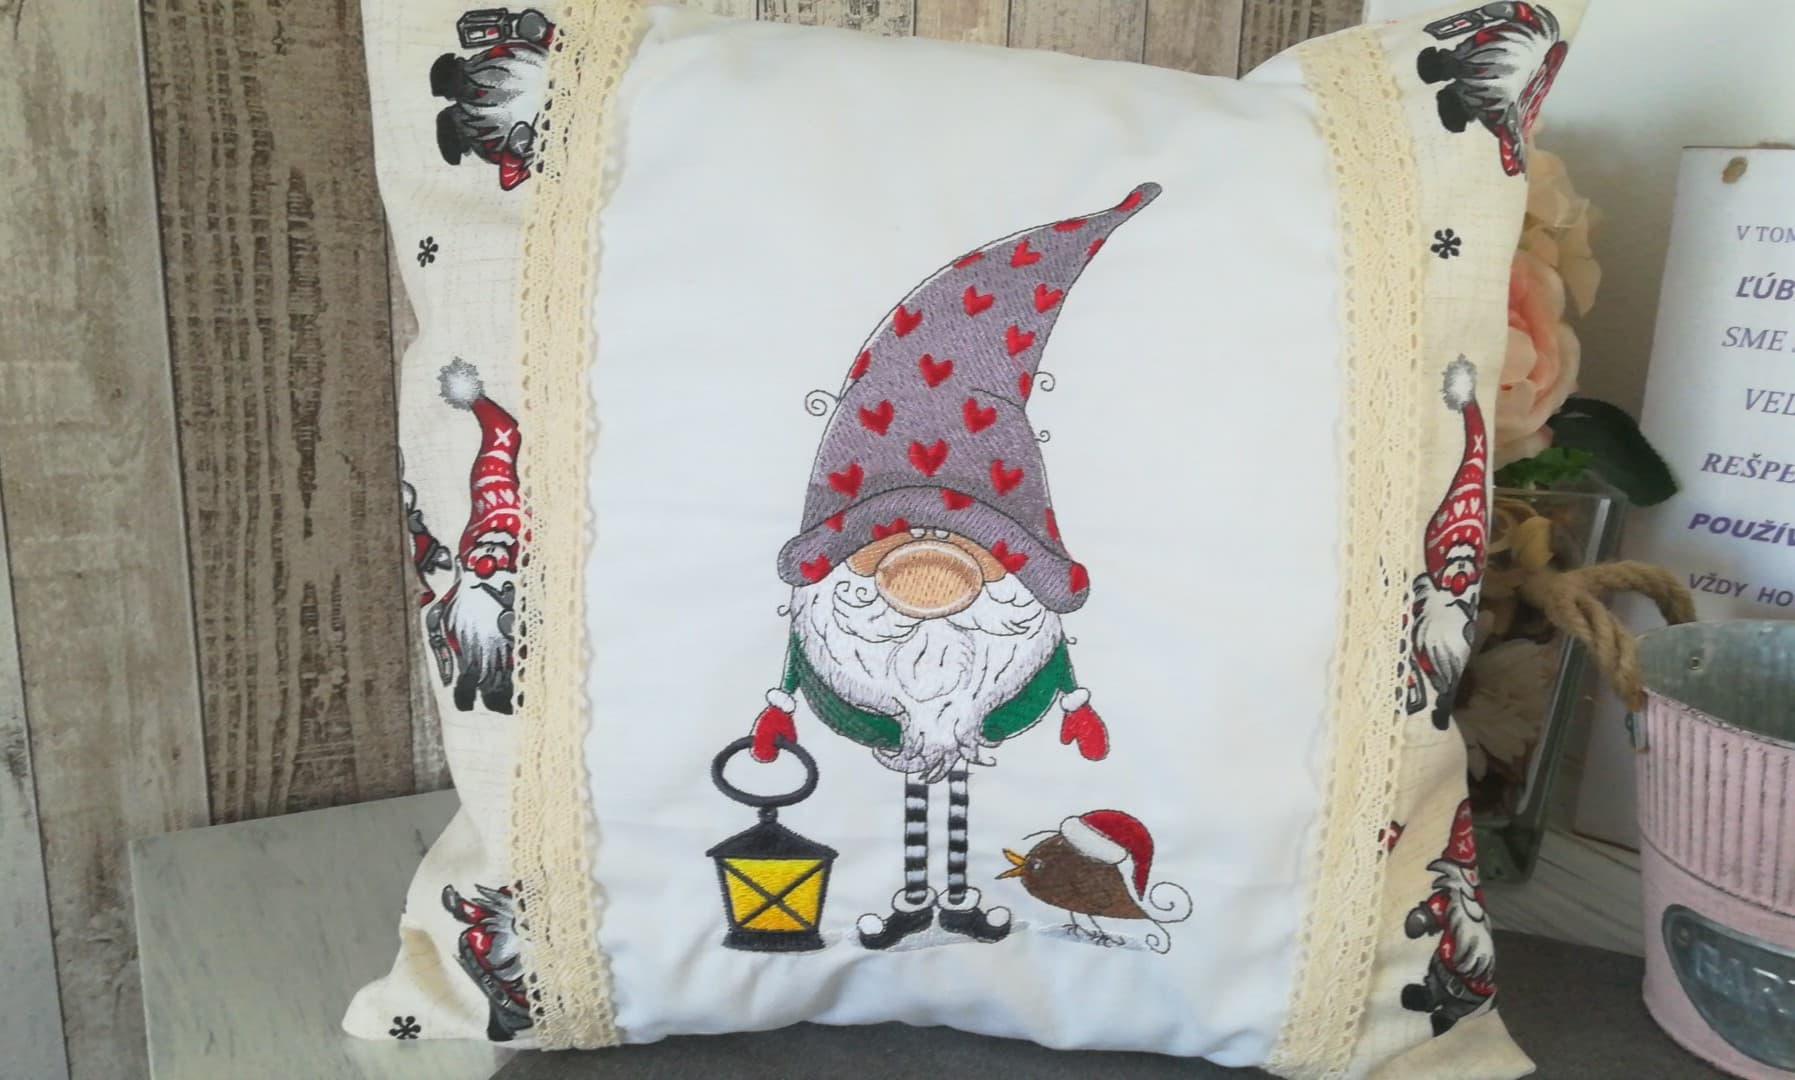 Embroidered cushion with Gnome in phrygian cap design